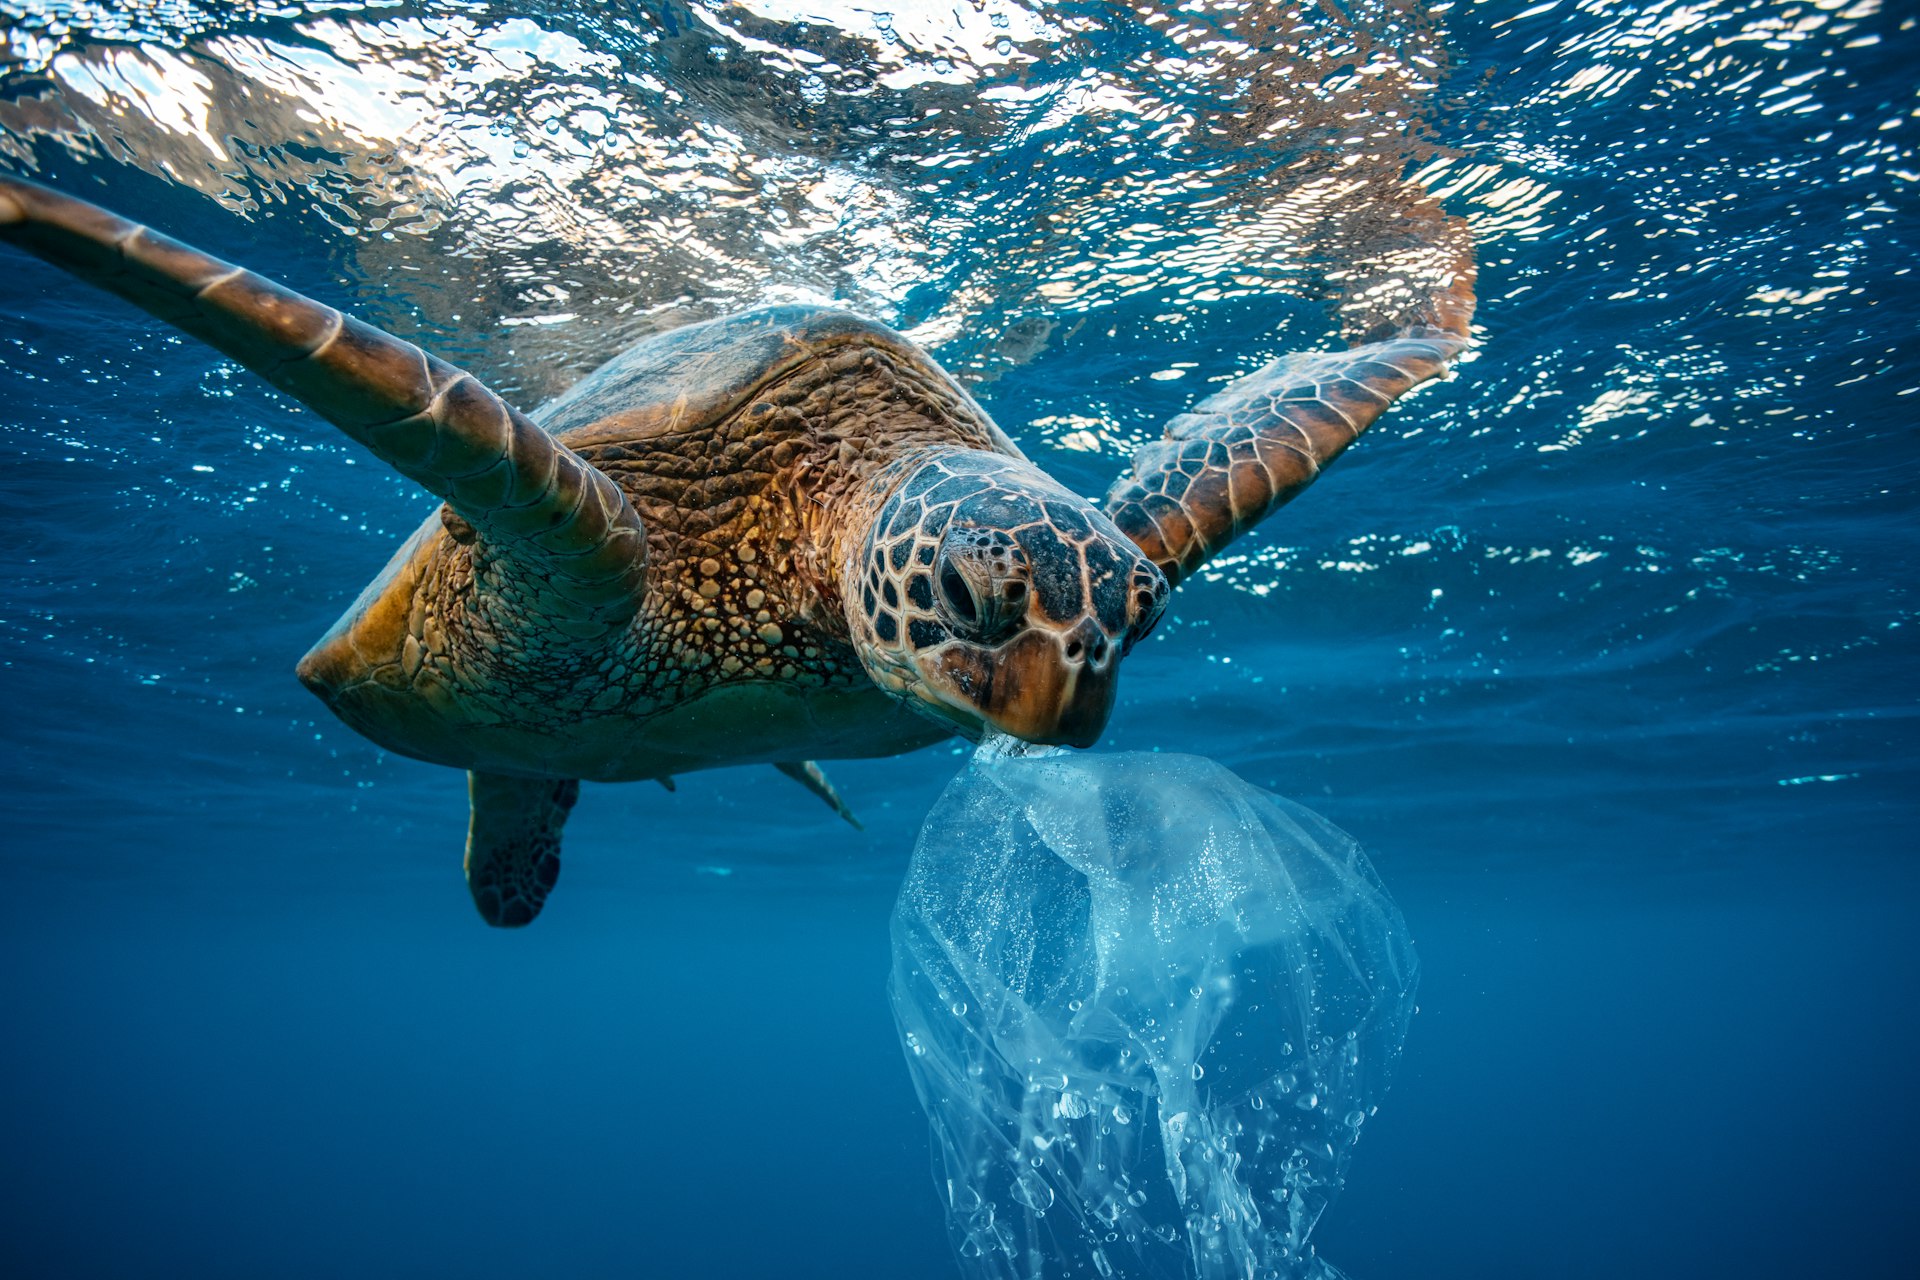 A turtle eating plastic in the sea